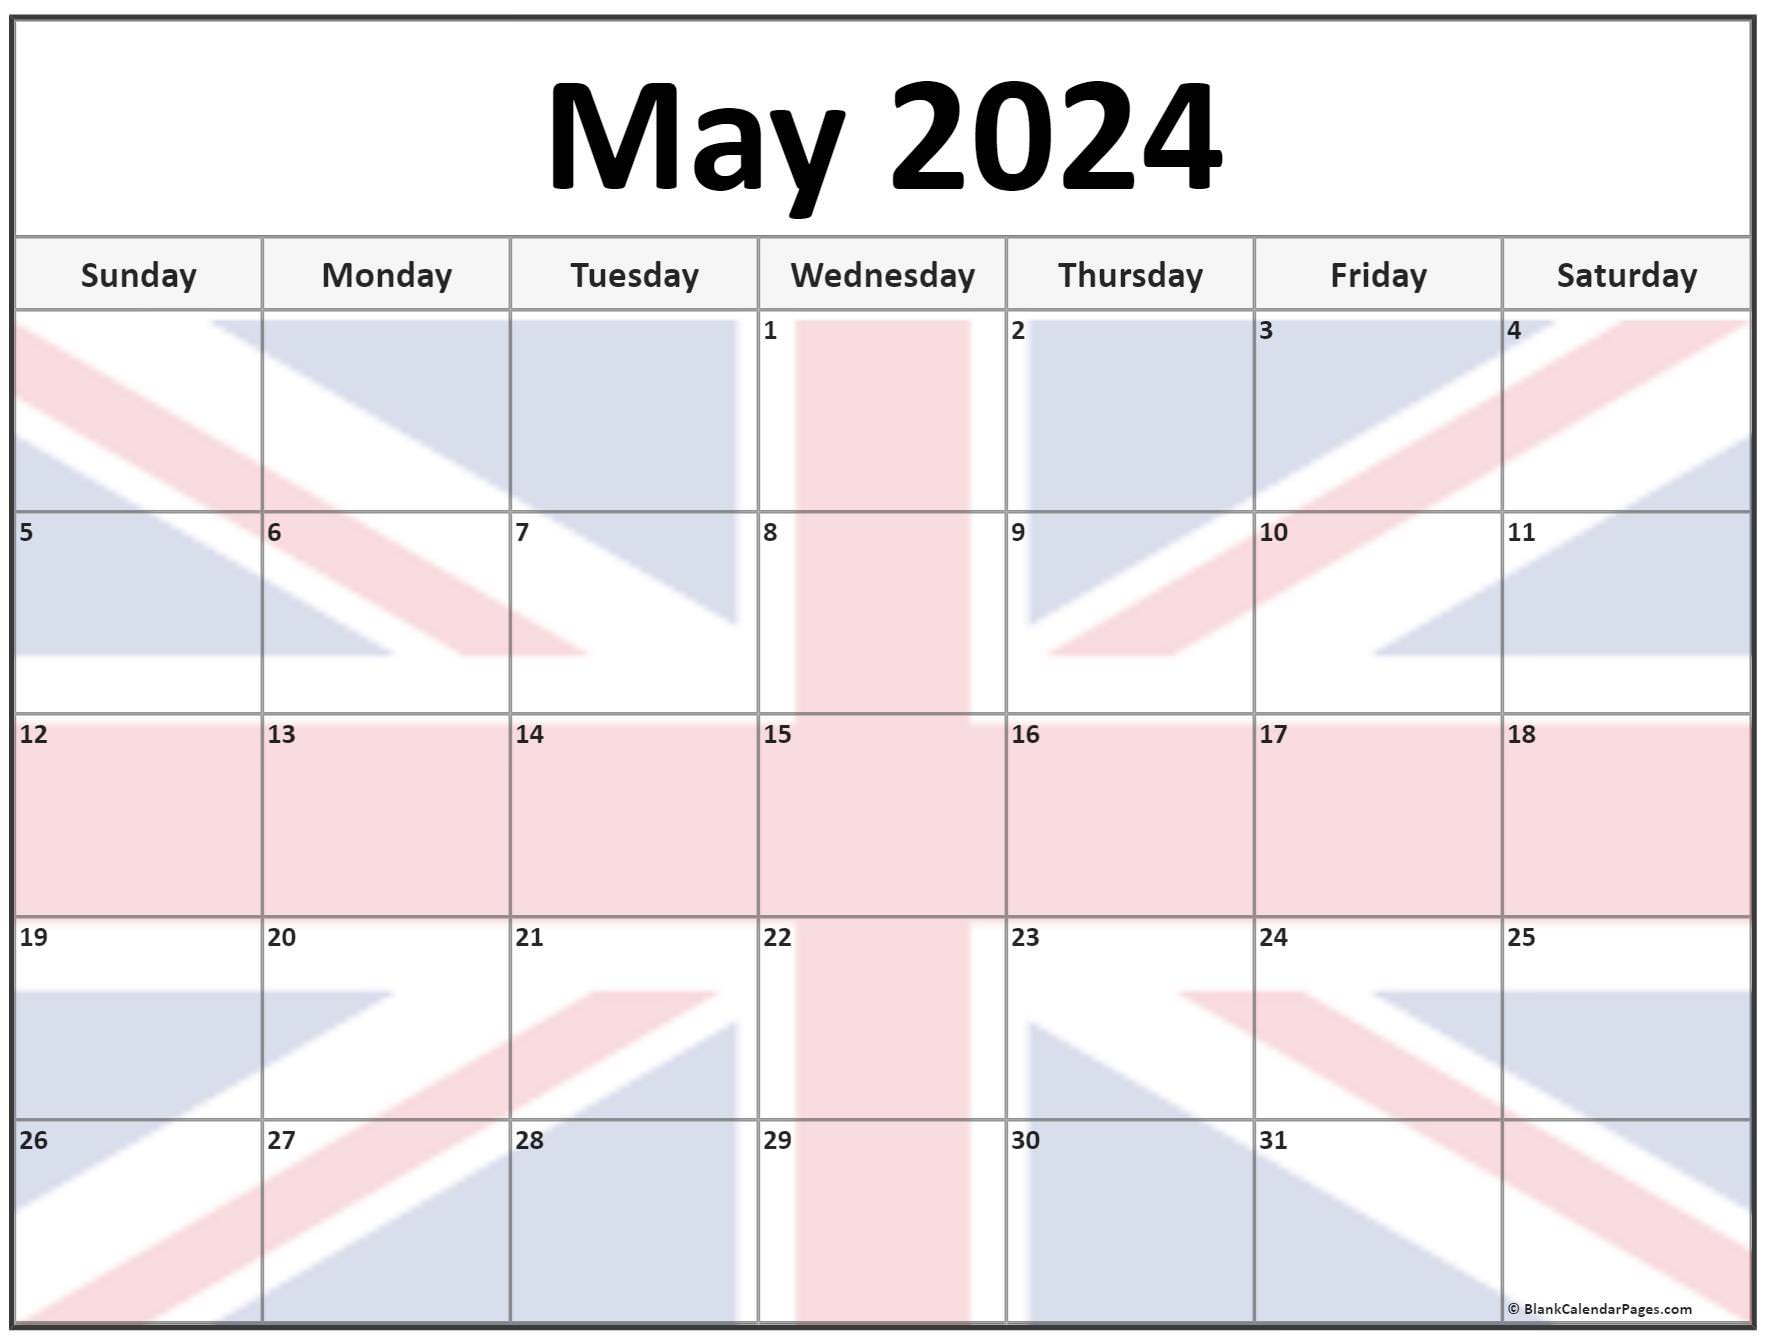 Collection of May 2024 photo calendars with image filters.